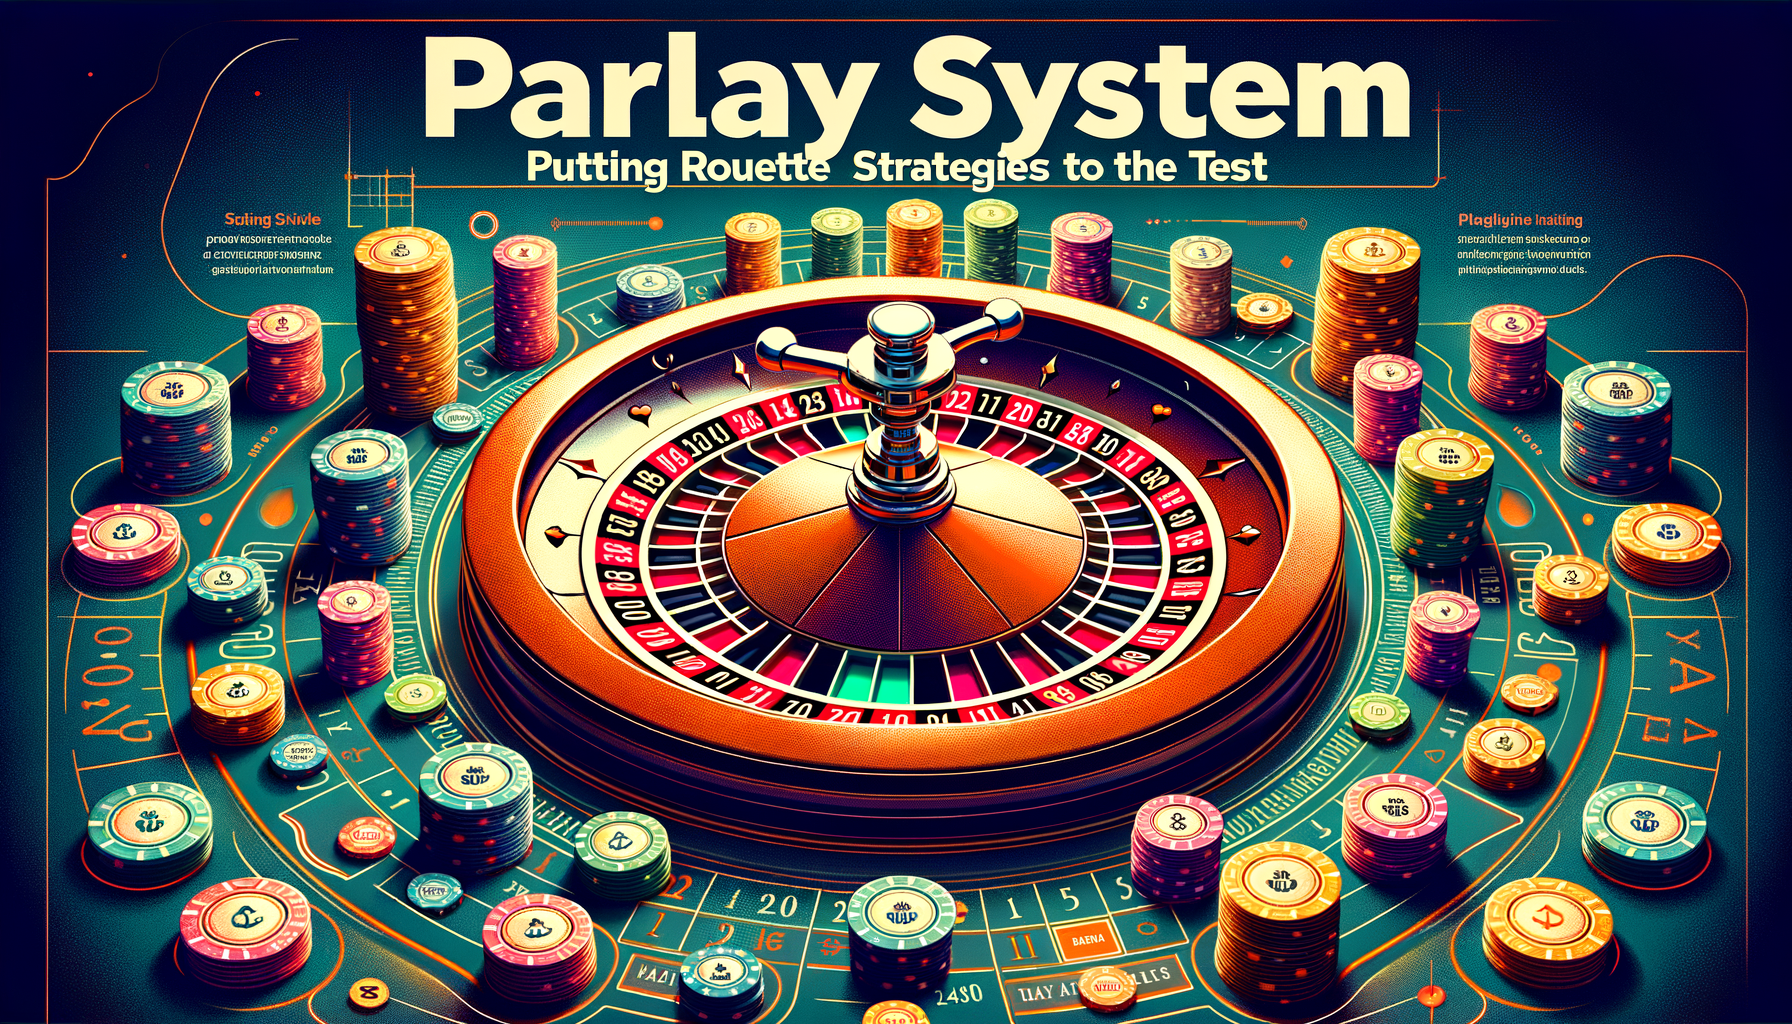 Parlay System: Putting Roulette Strategies to the Test